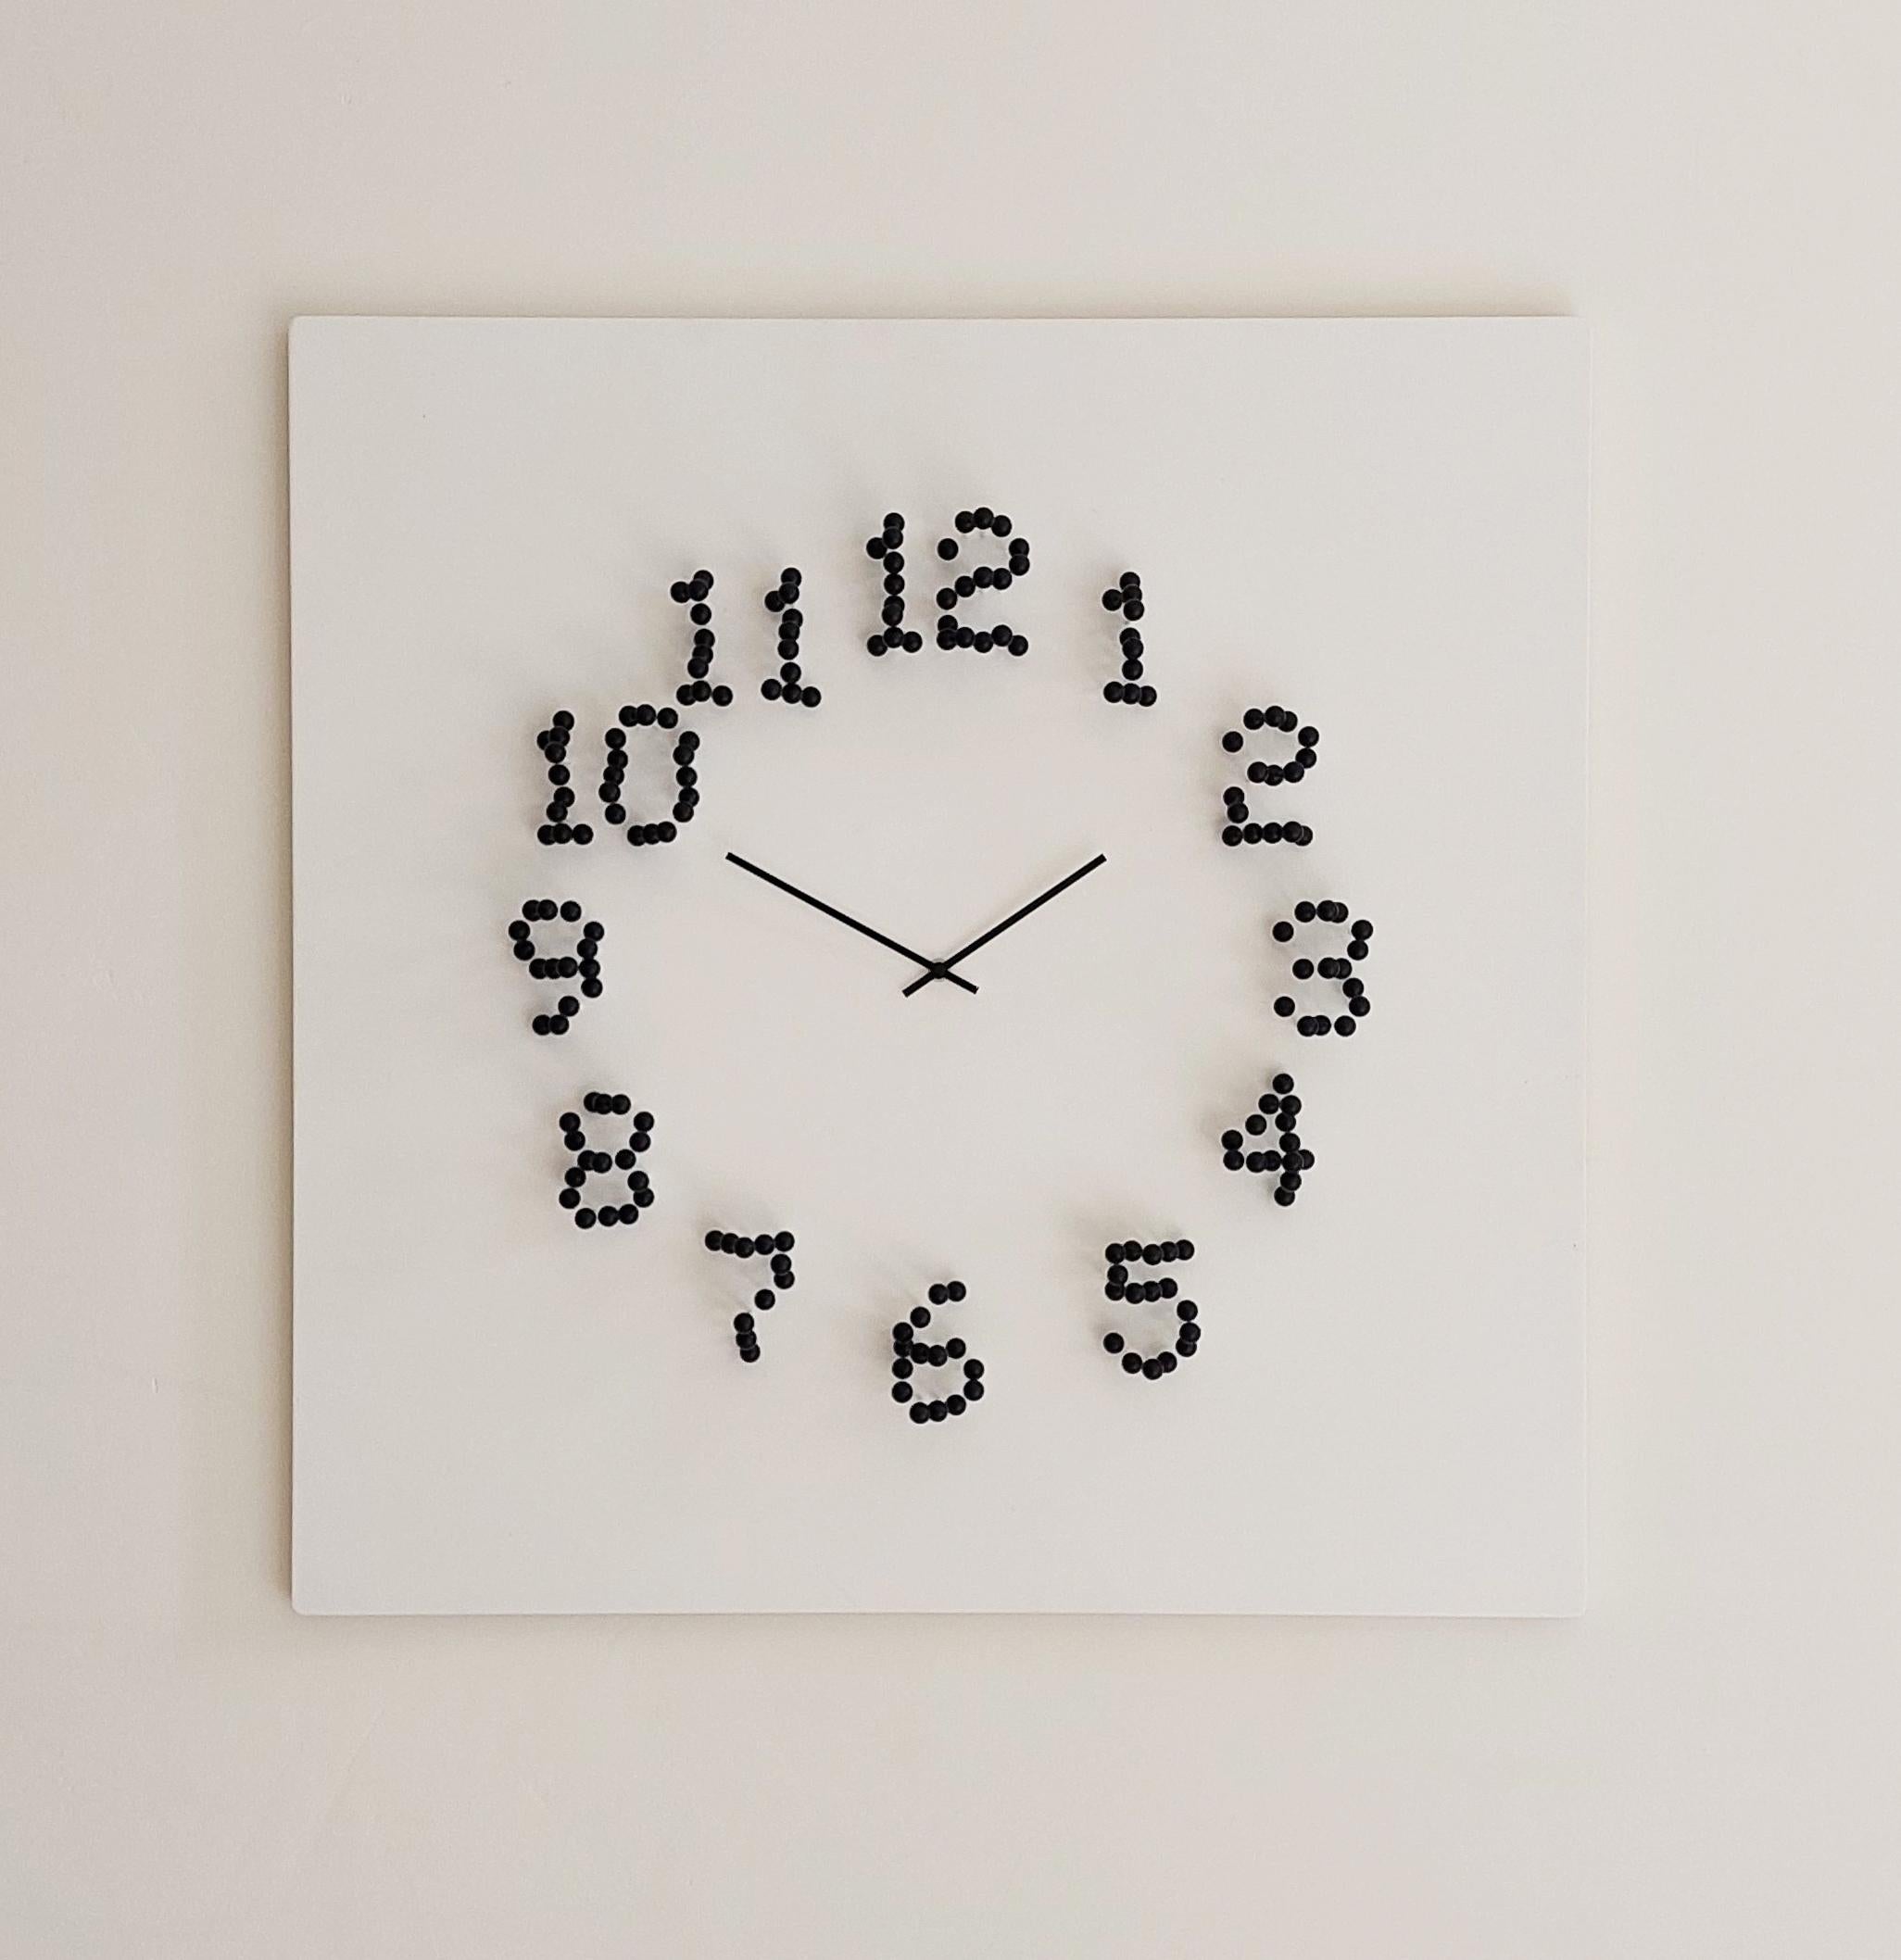 Mocap (white-black)
Illusionistic wall clock
Design: Jan Paul

“Time is an illusion”
Most wall-clocks have the same basic shape: round. Also the same looking time-indication by 
numbers or stripes.
“MOCAP” steps away from the basic. It’s appearance